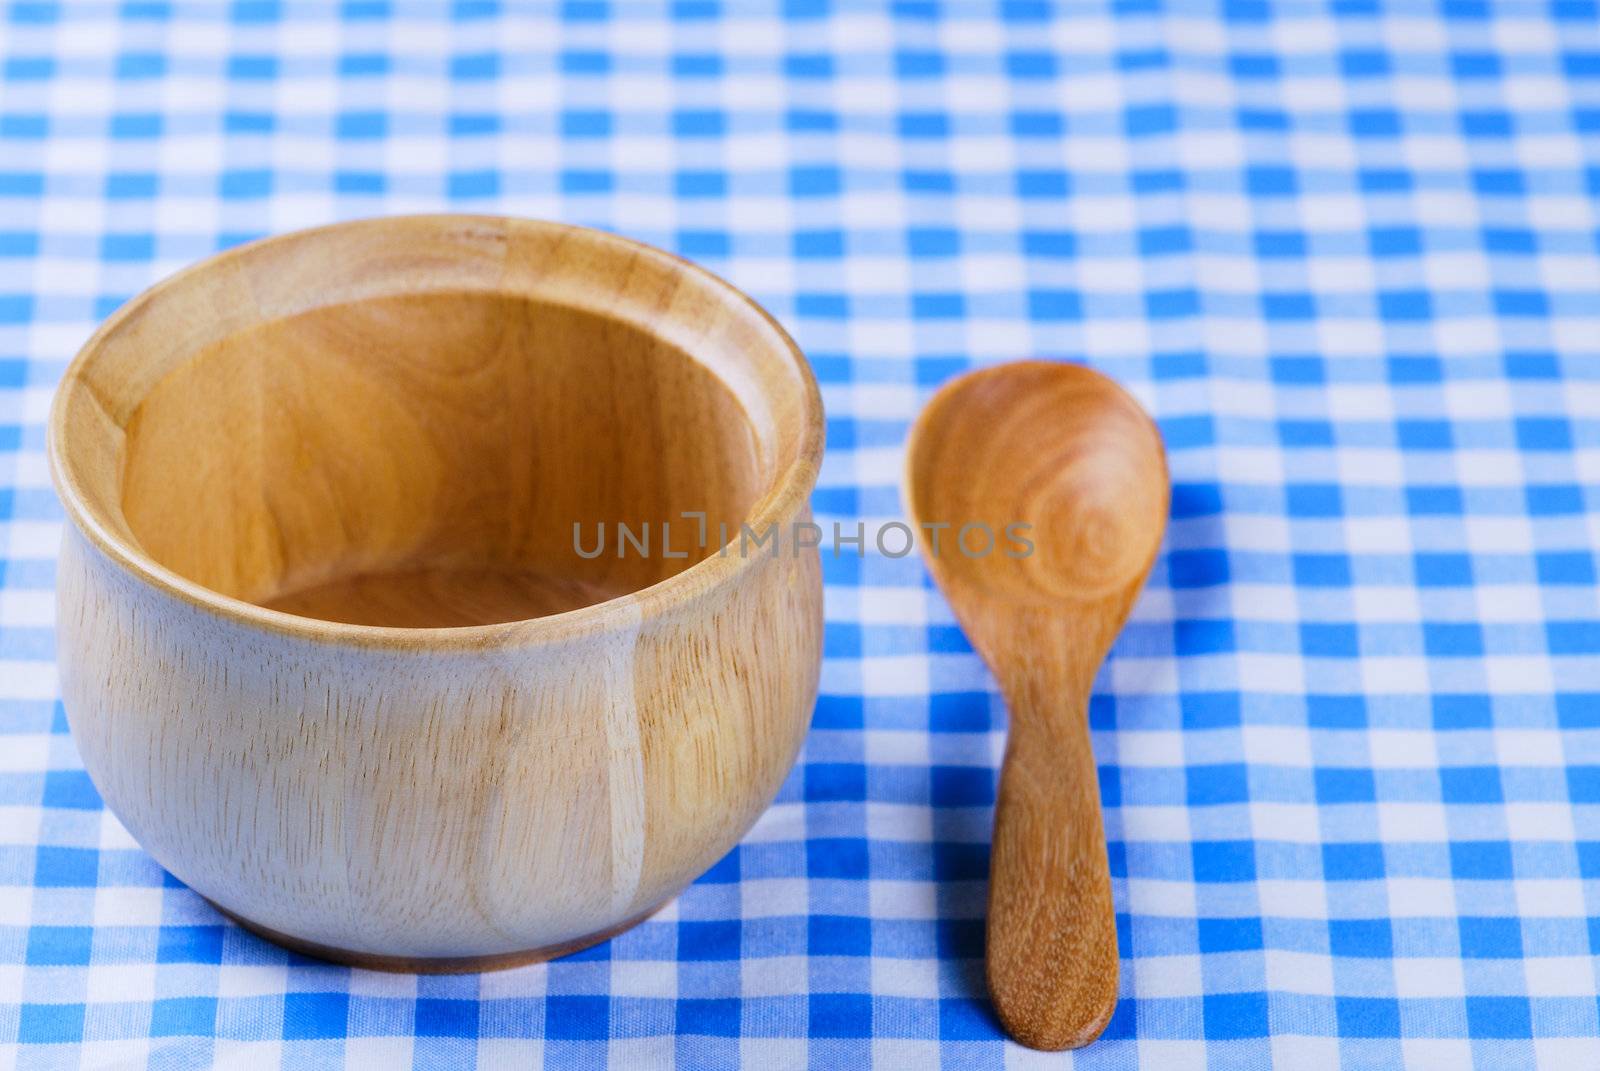 Wooden bowl, tablecloth, spoon, fork on table background  by teen00000